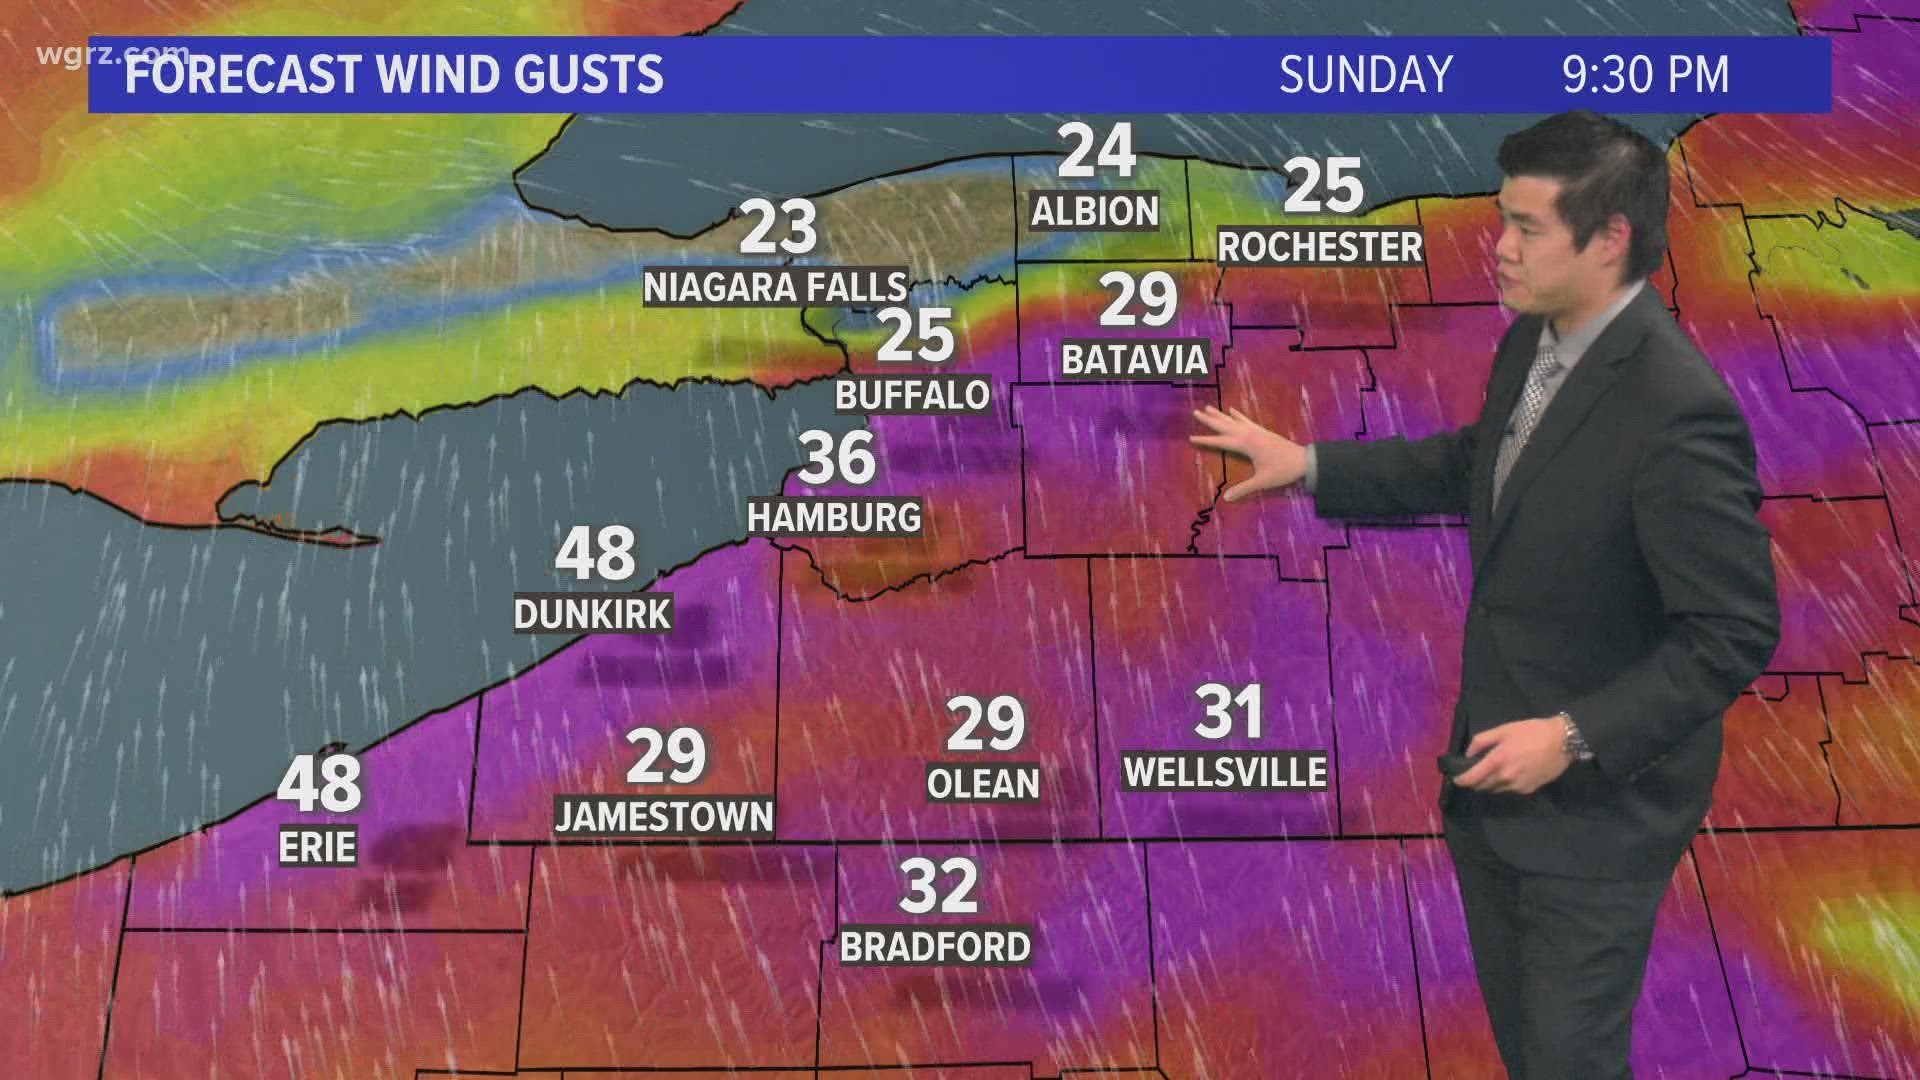 A High Wind Watch is in effect for most areas of WNY starting Sunday night at 7 p.m. for Chautauqua and Southern Erie Counties until 8 p.m. Monday.